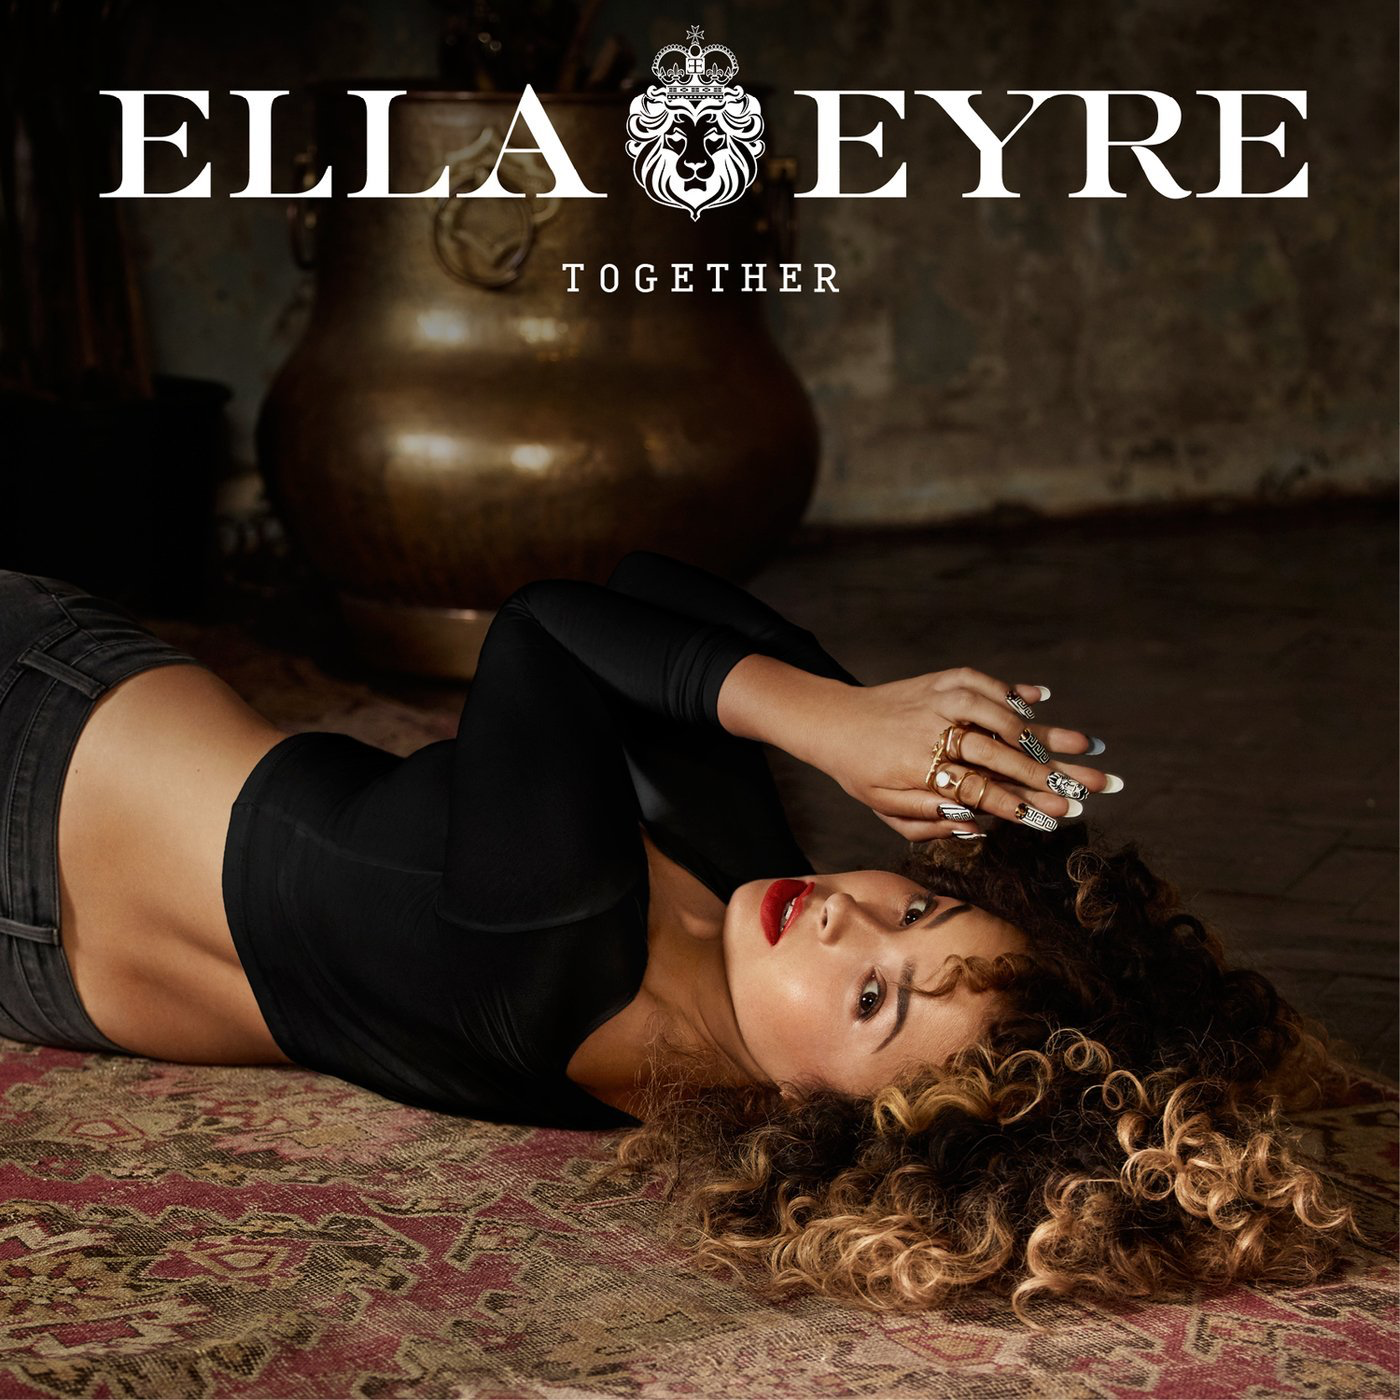 Lyrics to “Together” song by Ella Eyre.